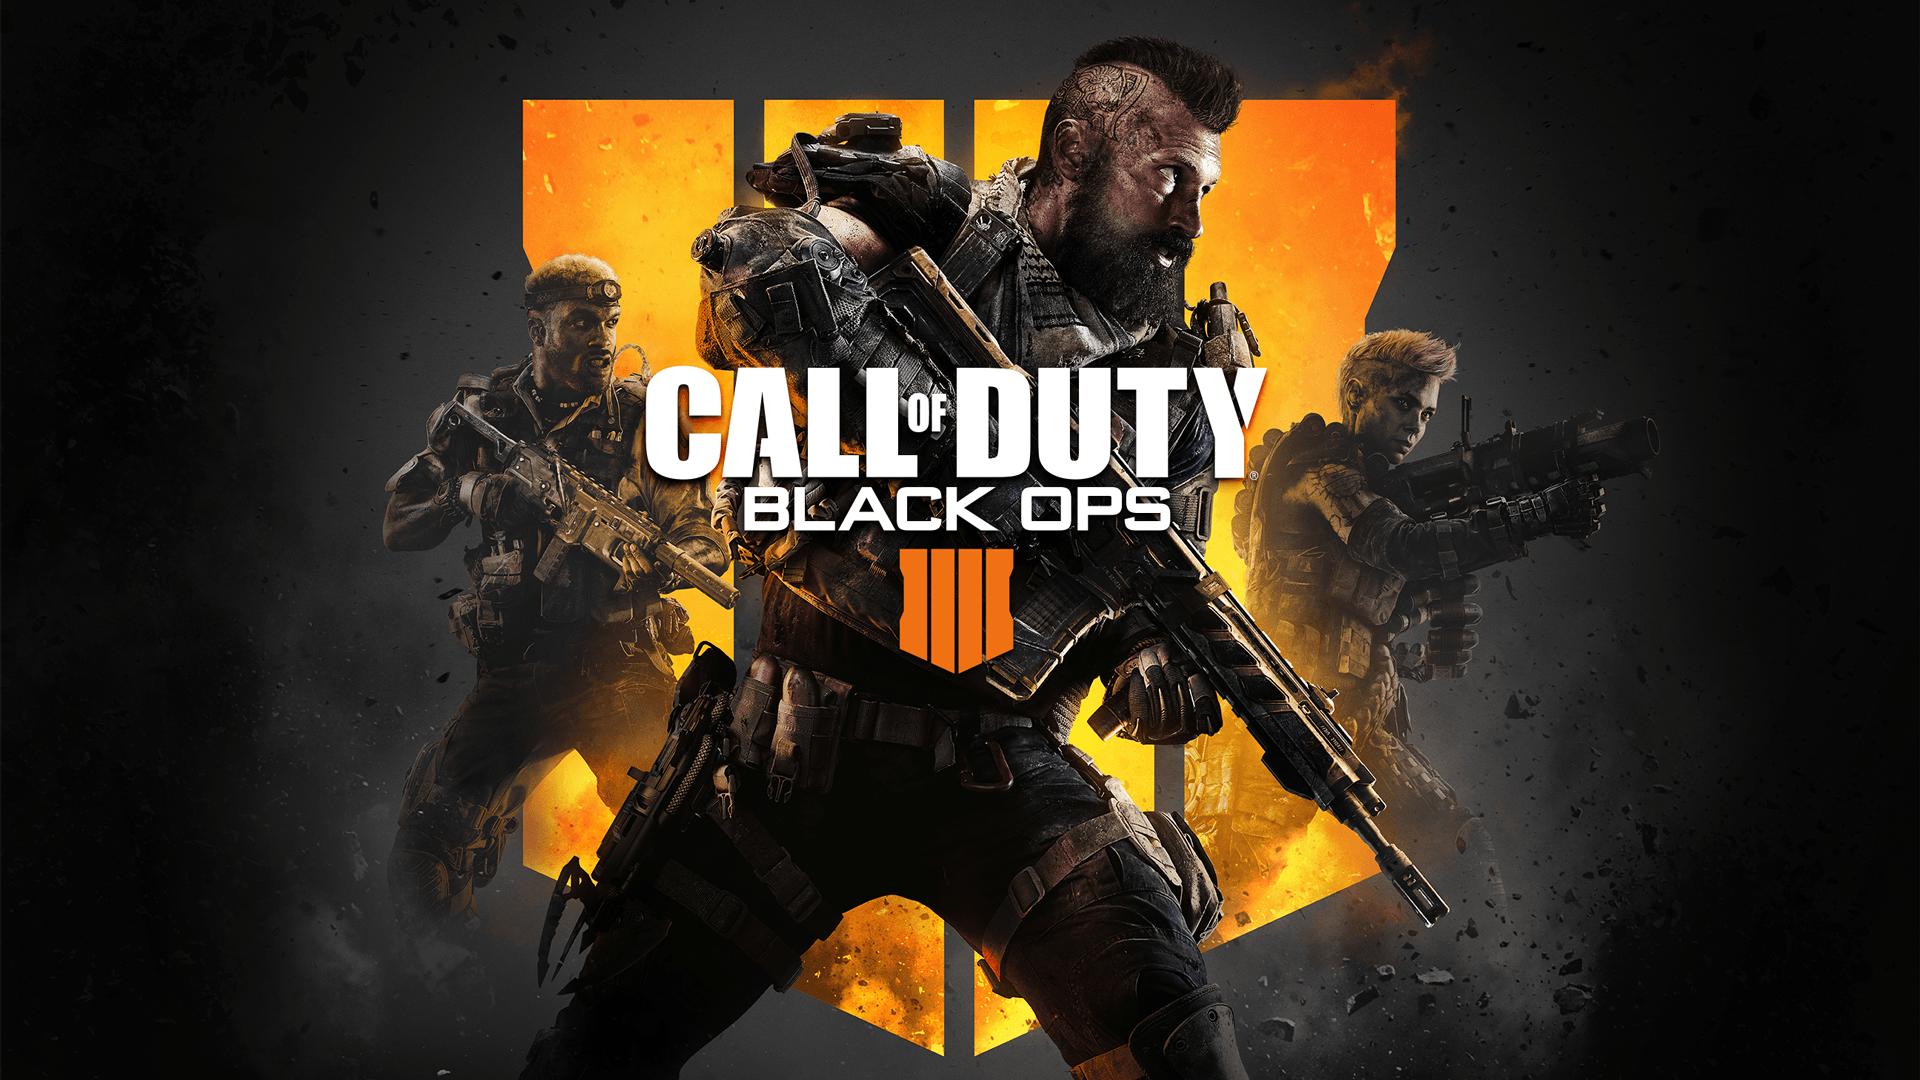 Call Of Duty Blackout Wallpapers Wallpaper Cave